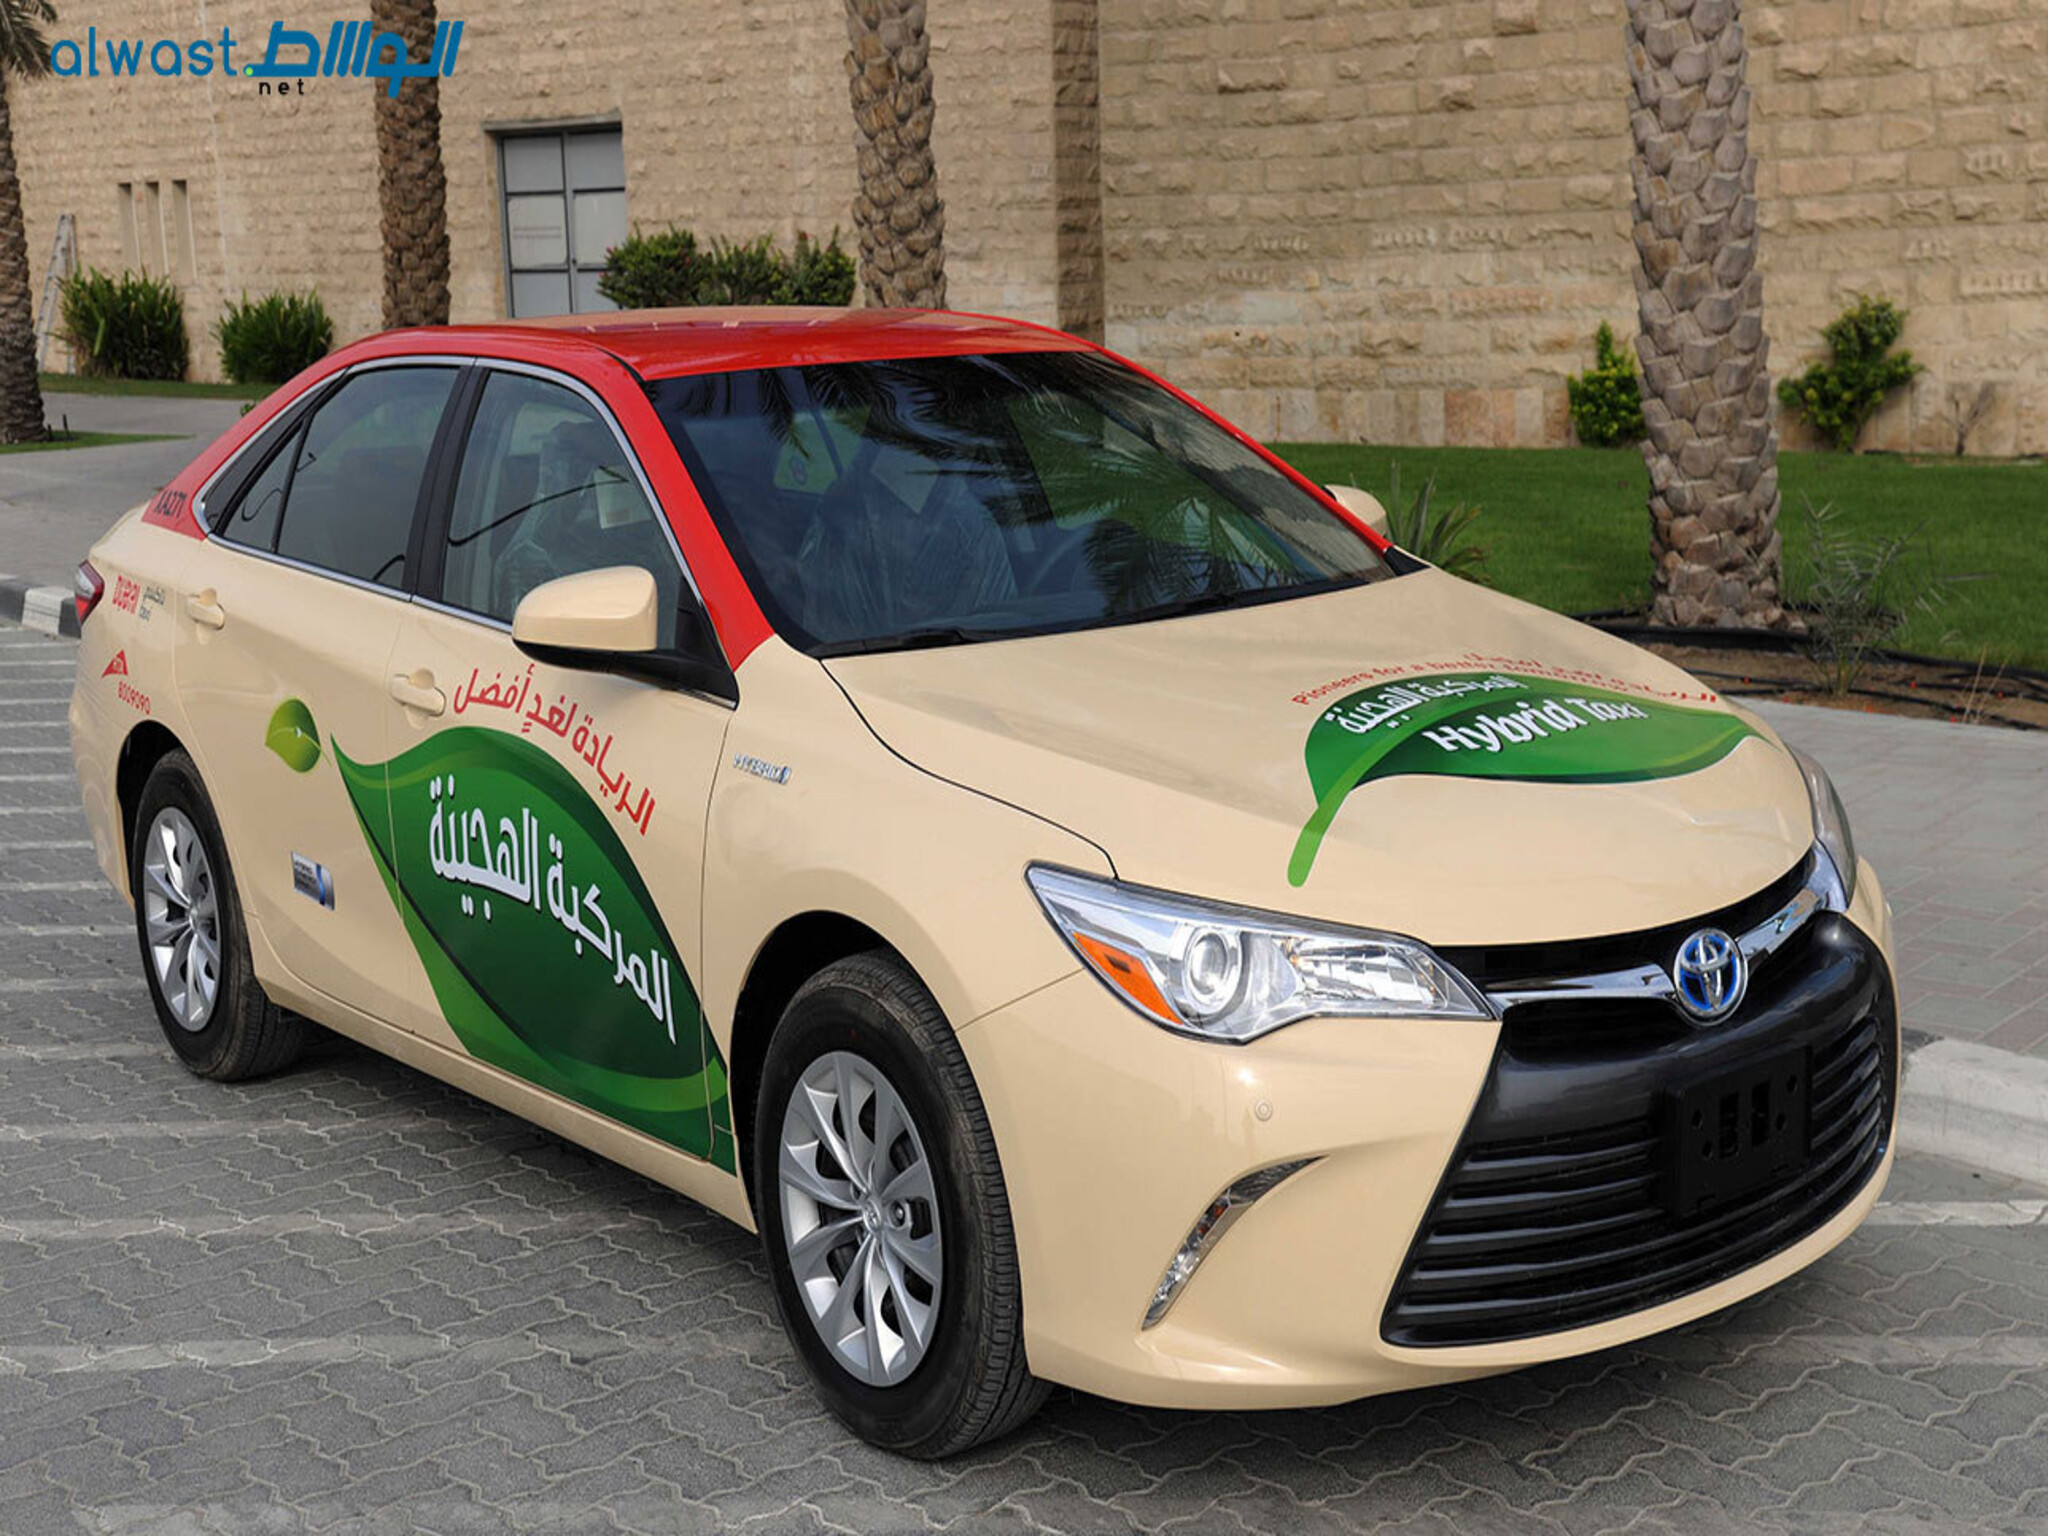 Dubai Taxi introduces new service, offering 50% off for people of determination